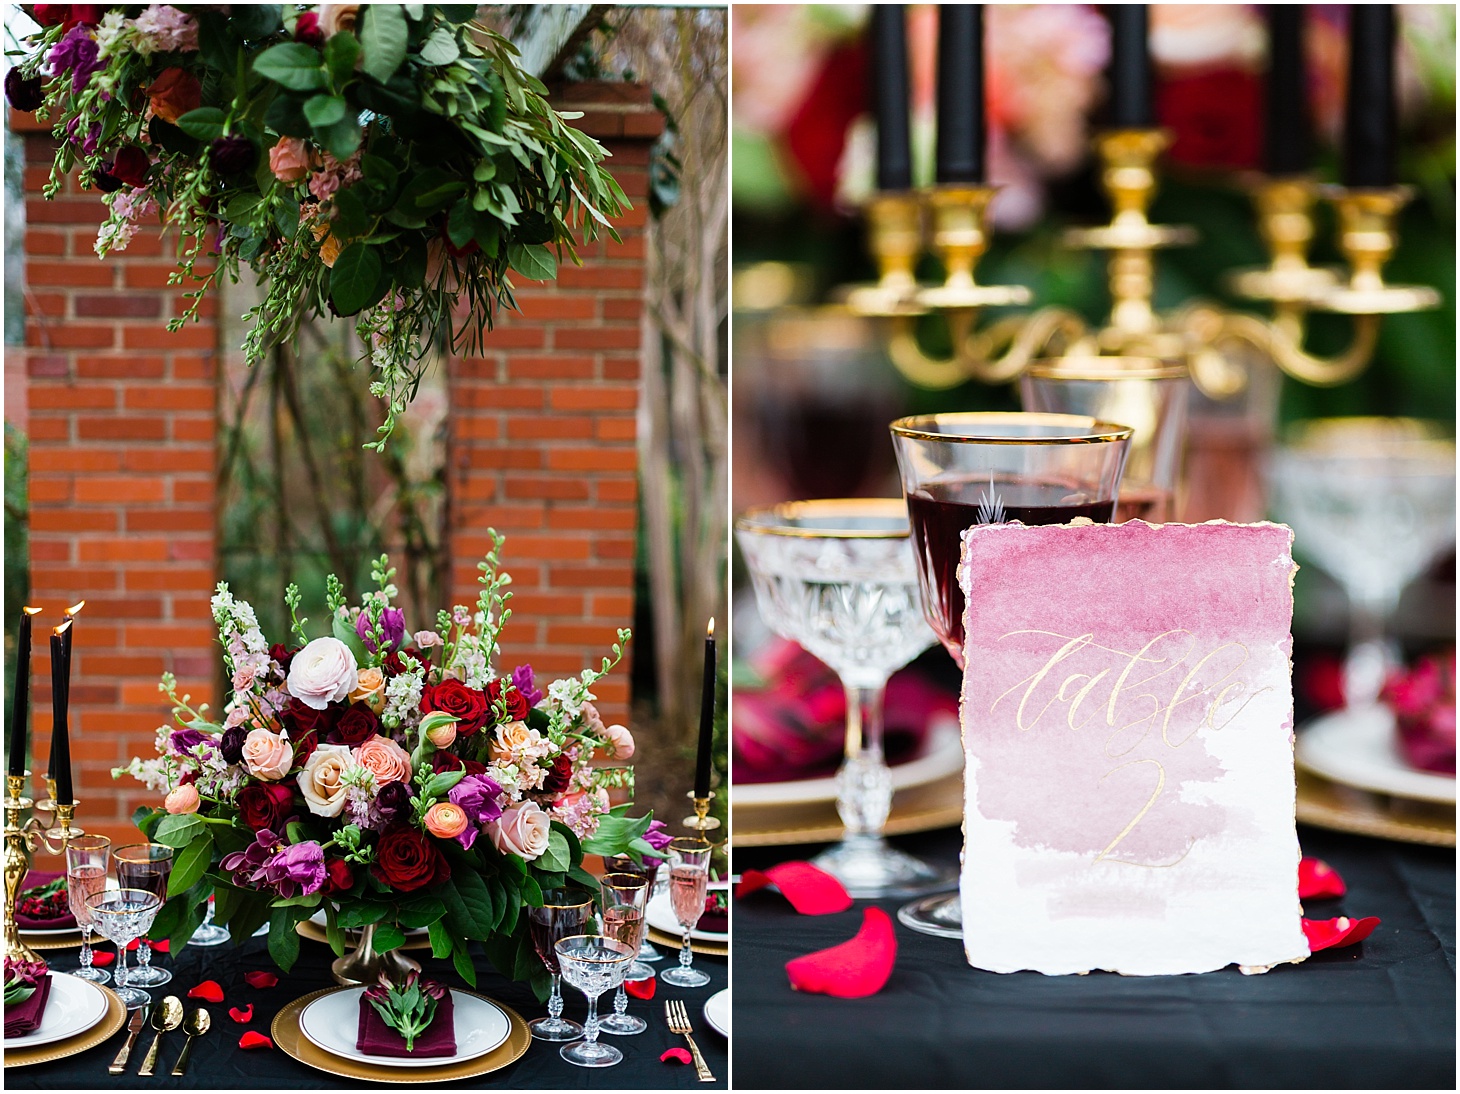 Eight Tree Street Floral and Gracefully Made Art Wedding Details at River Farm in Alexandria, VA | Black and Red Gothic-Inspired Wedding Editorial | Sarah Bradshaw Photography